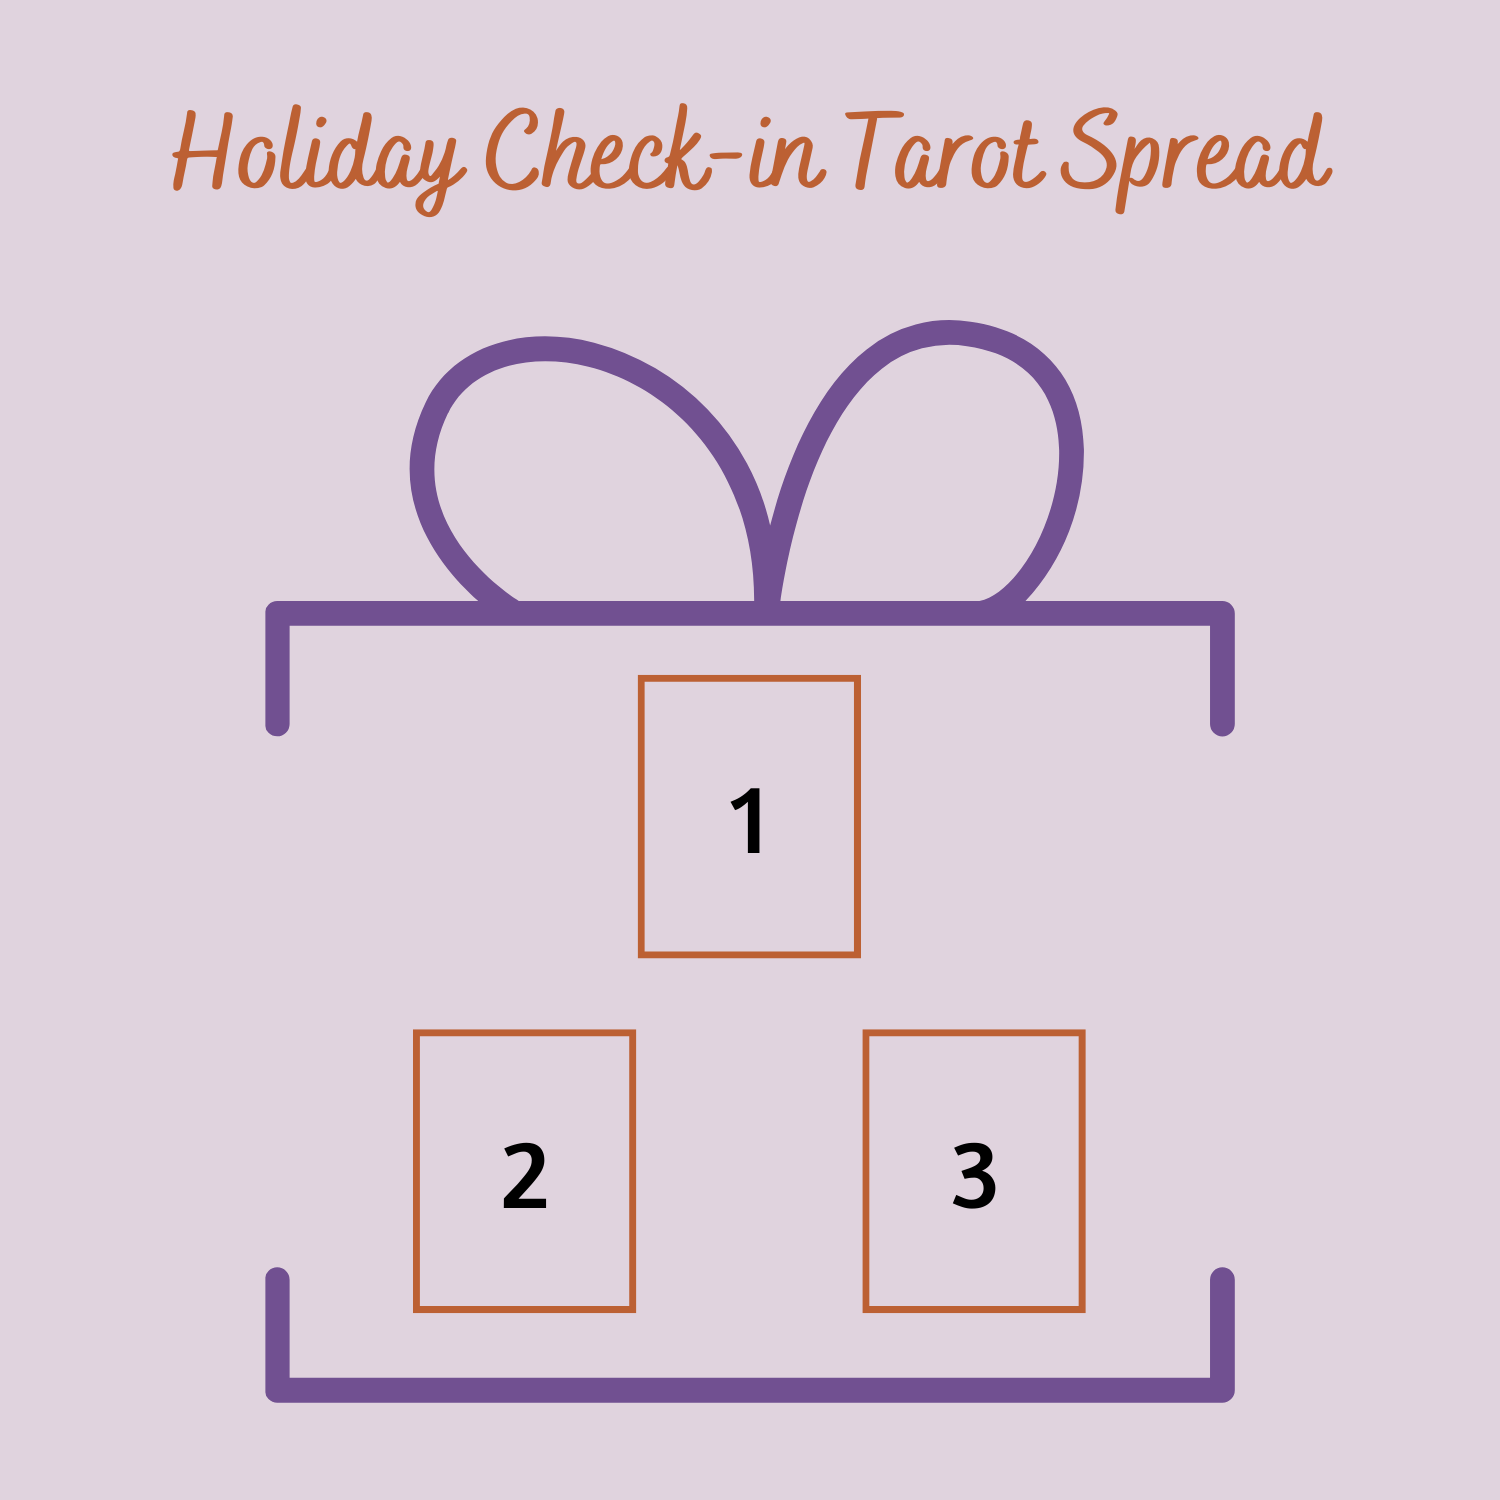 Image description: a tarot spread arranged to look like a gift box. There are three cards to the spread.